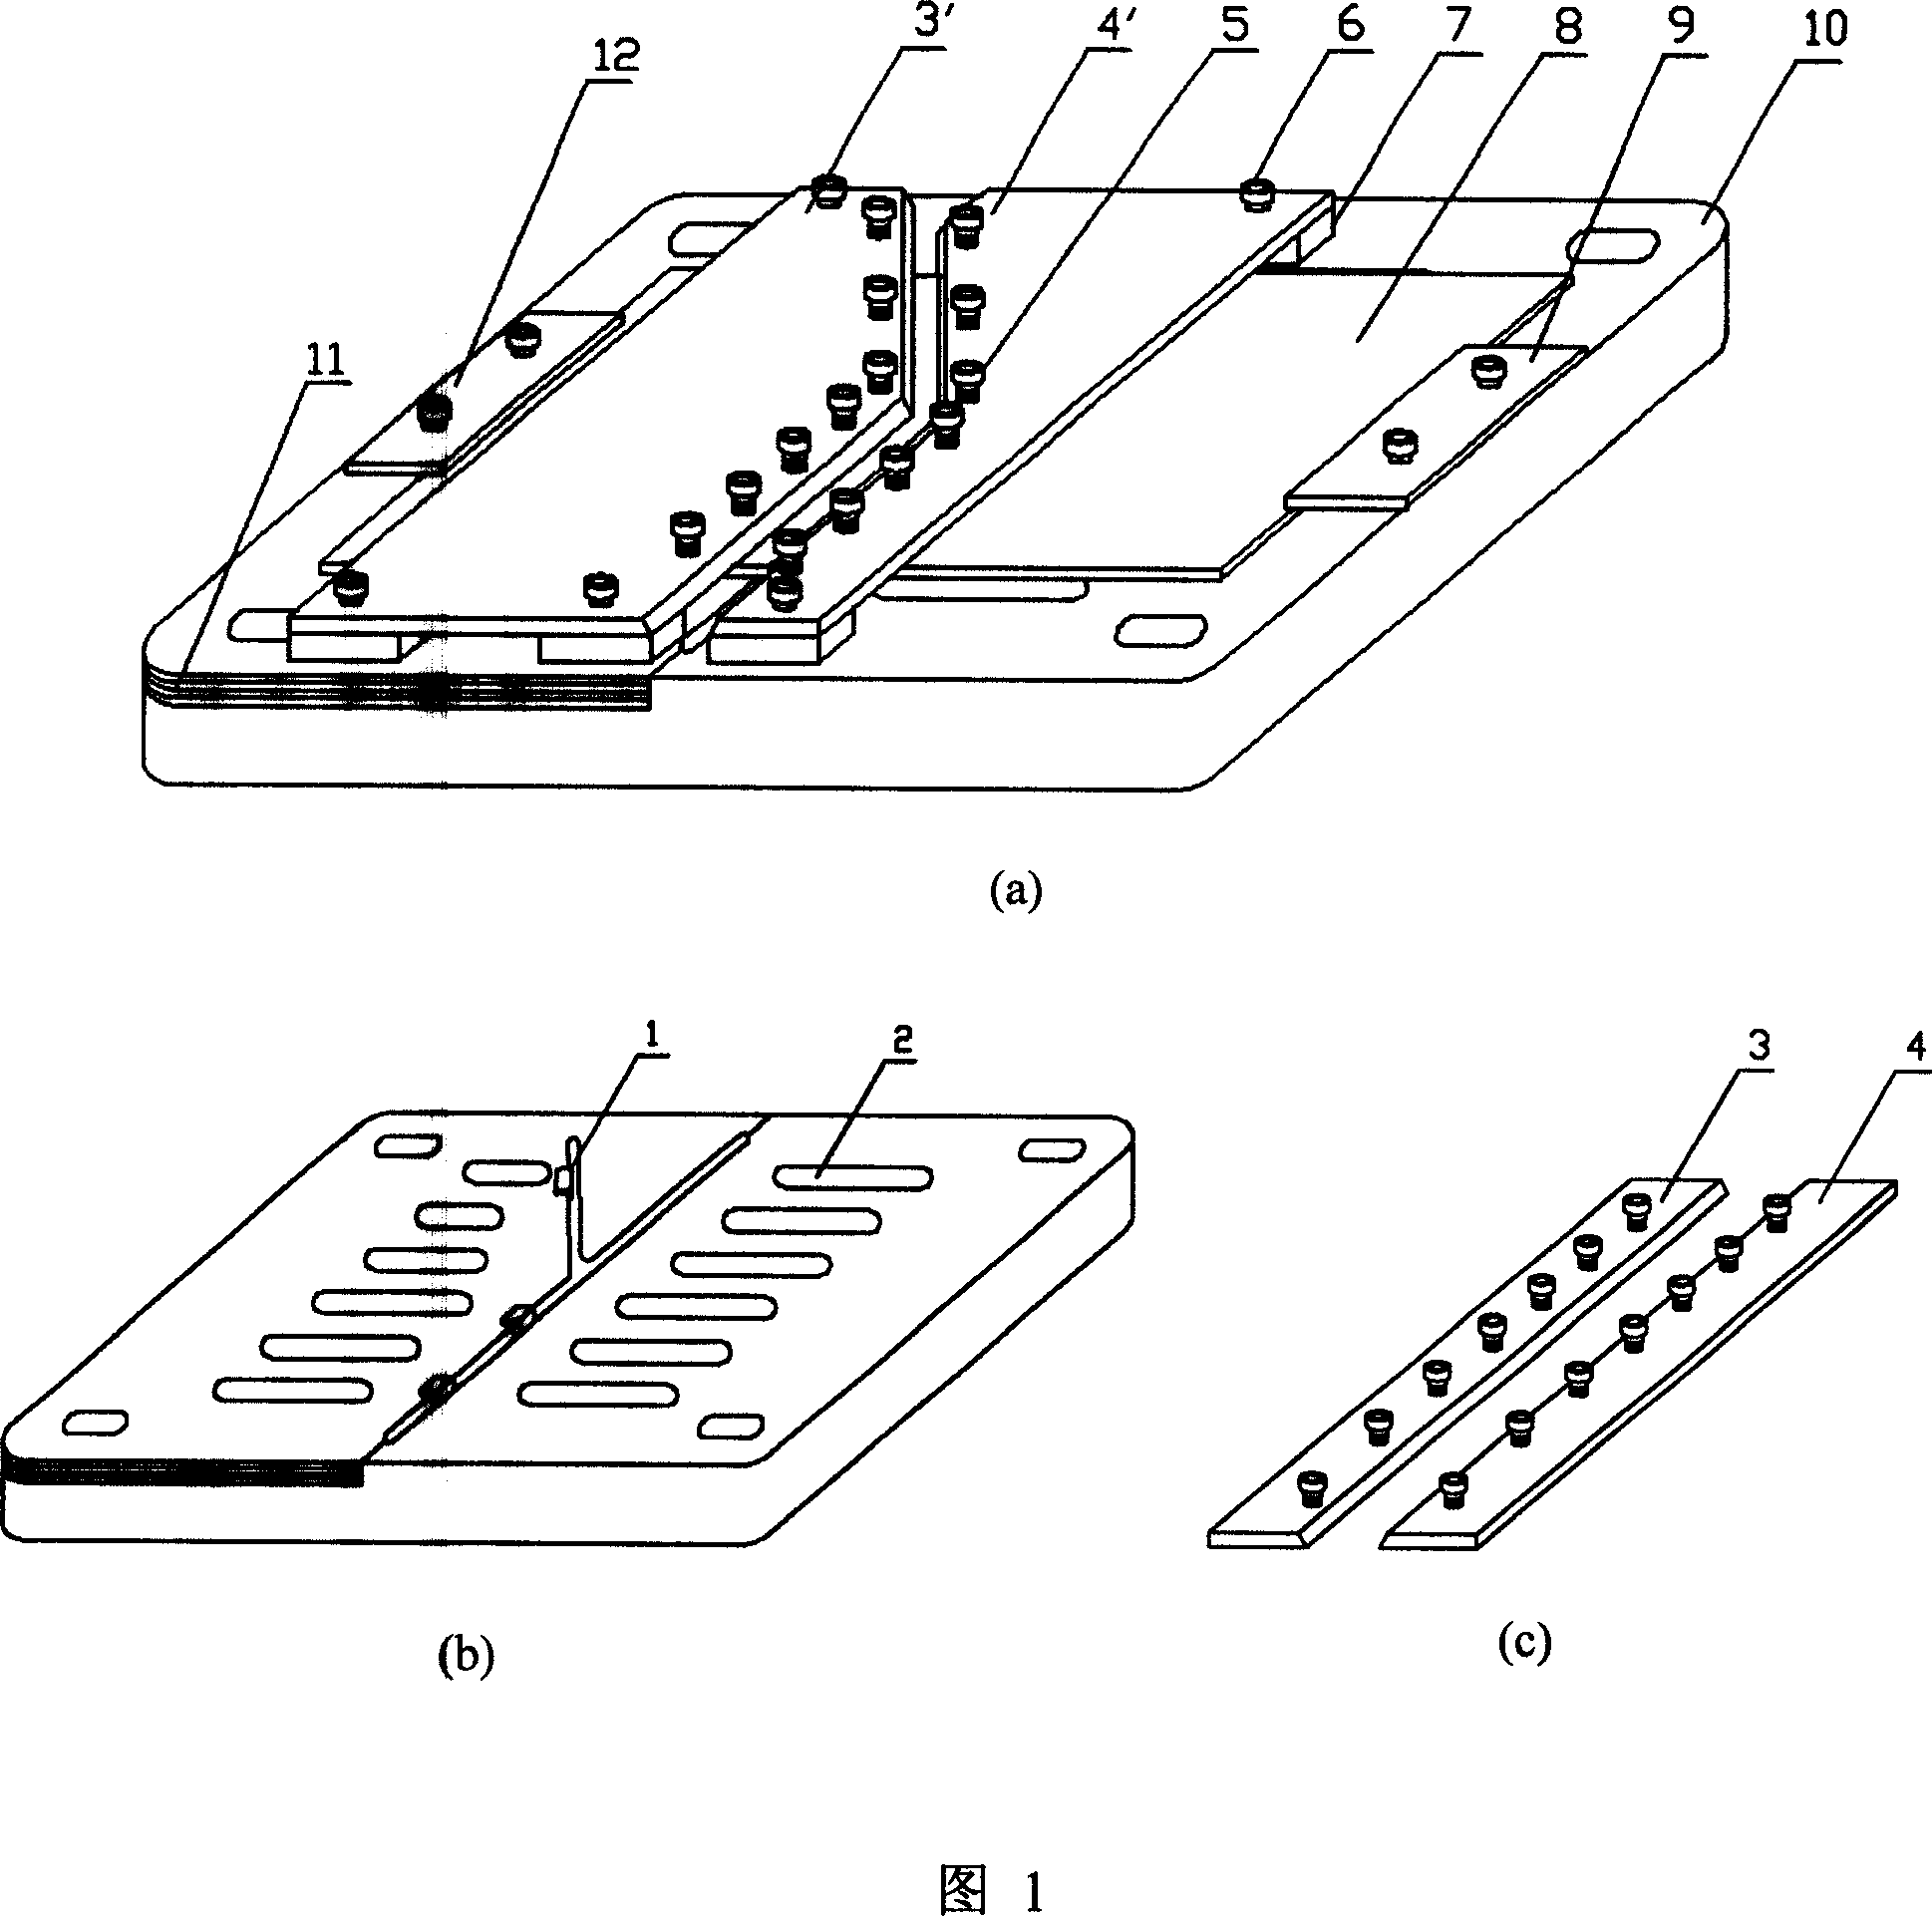 Deformable welding fixture for plate splicing welding with linear and curved weld seams